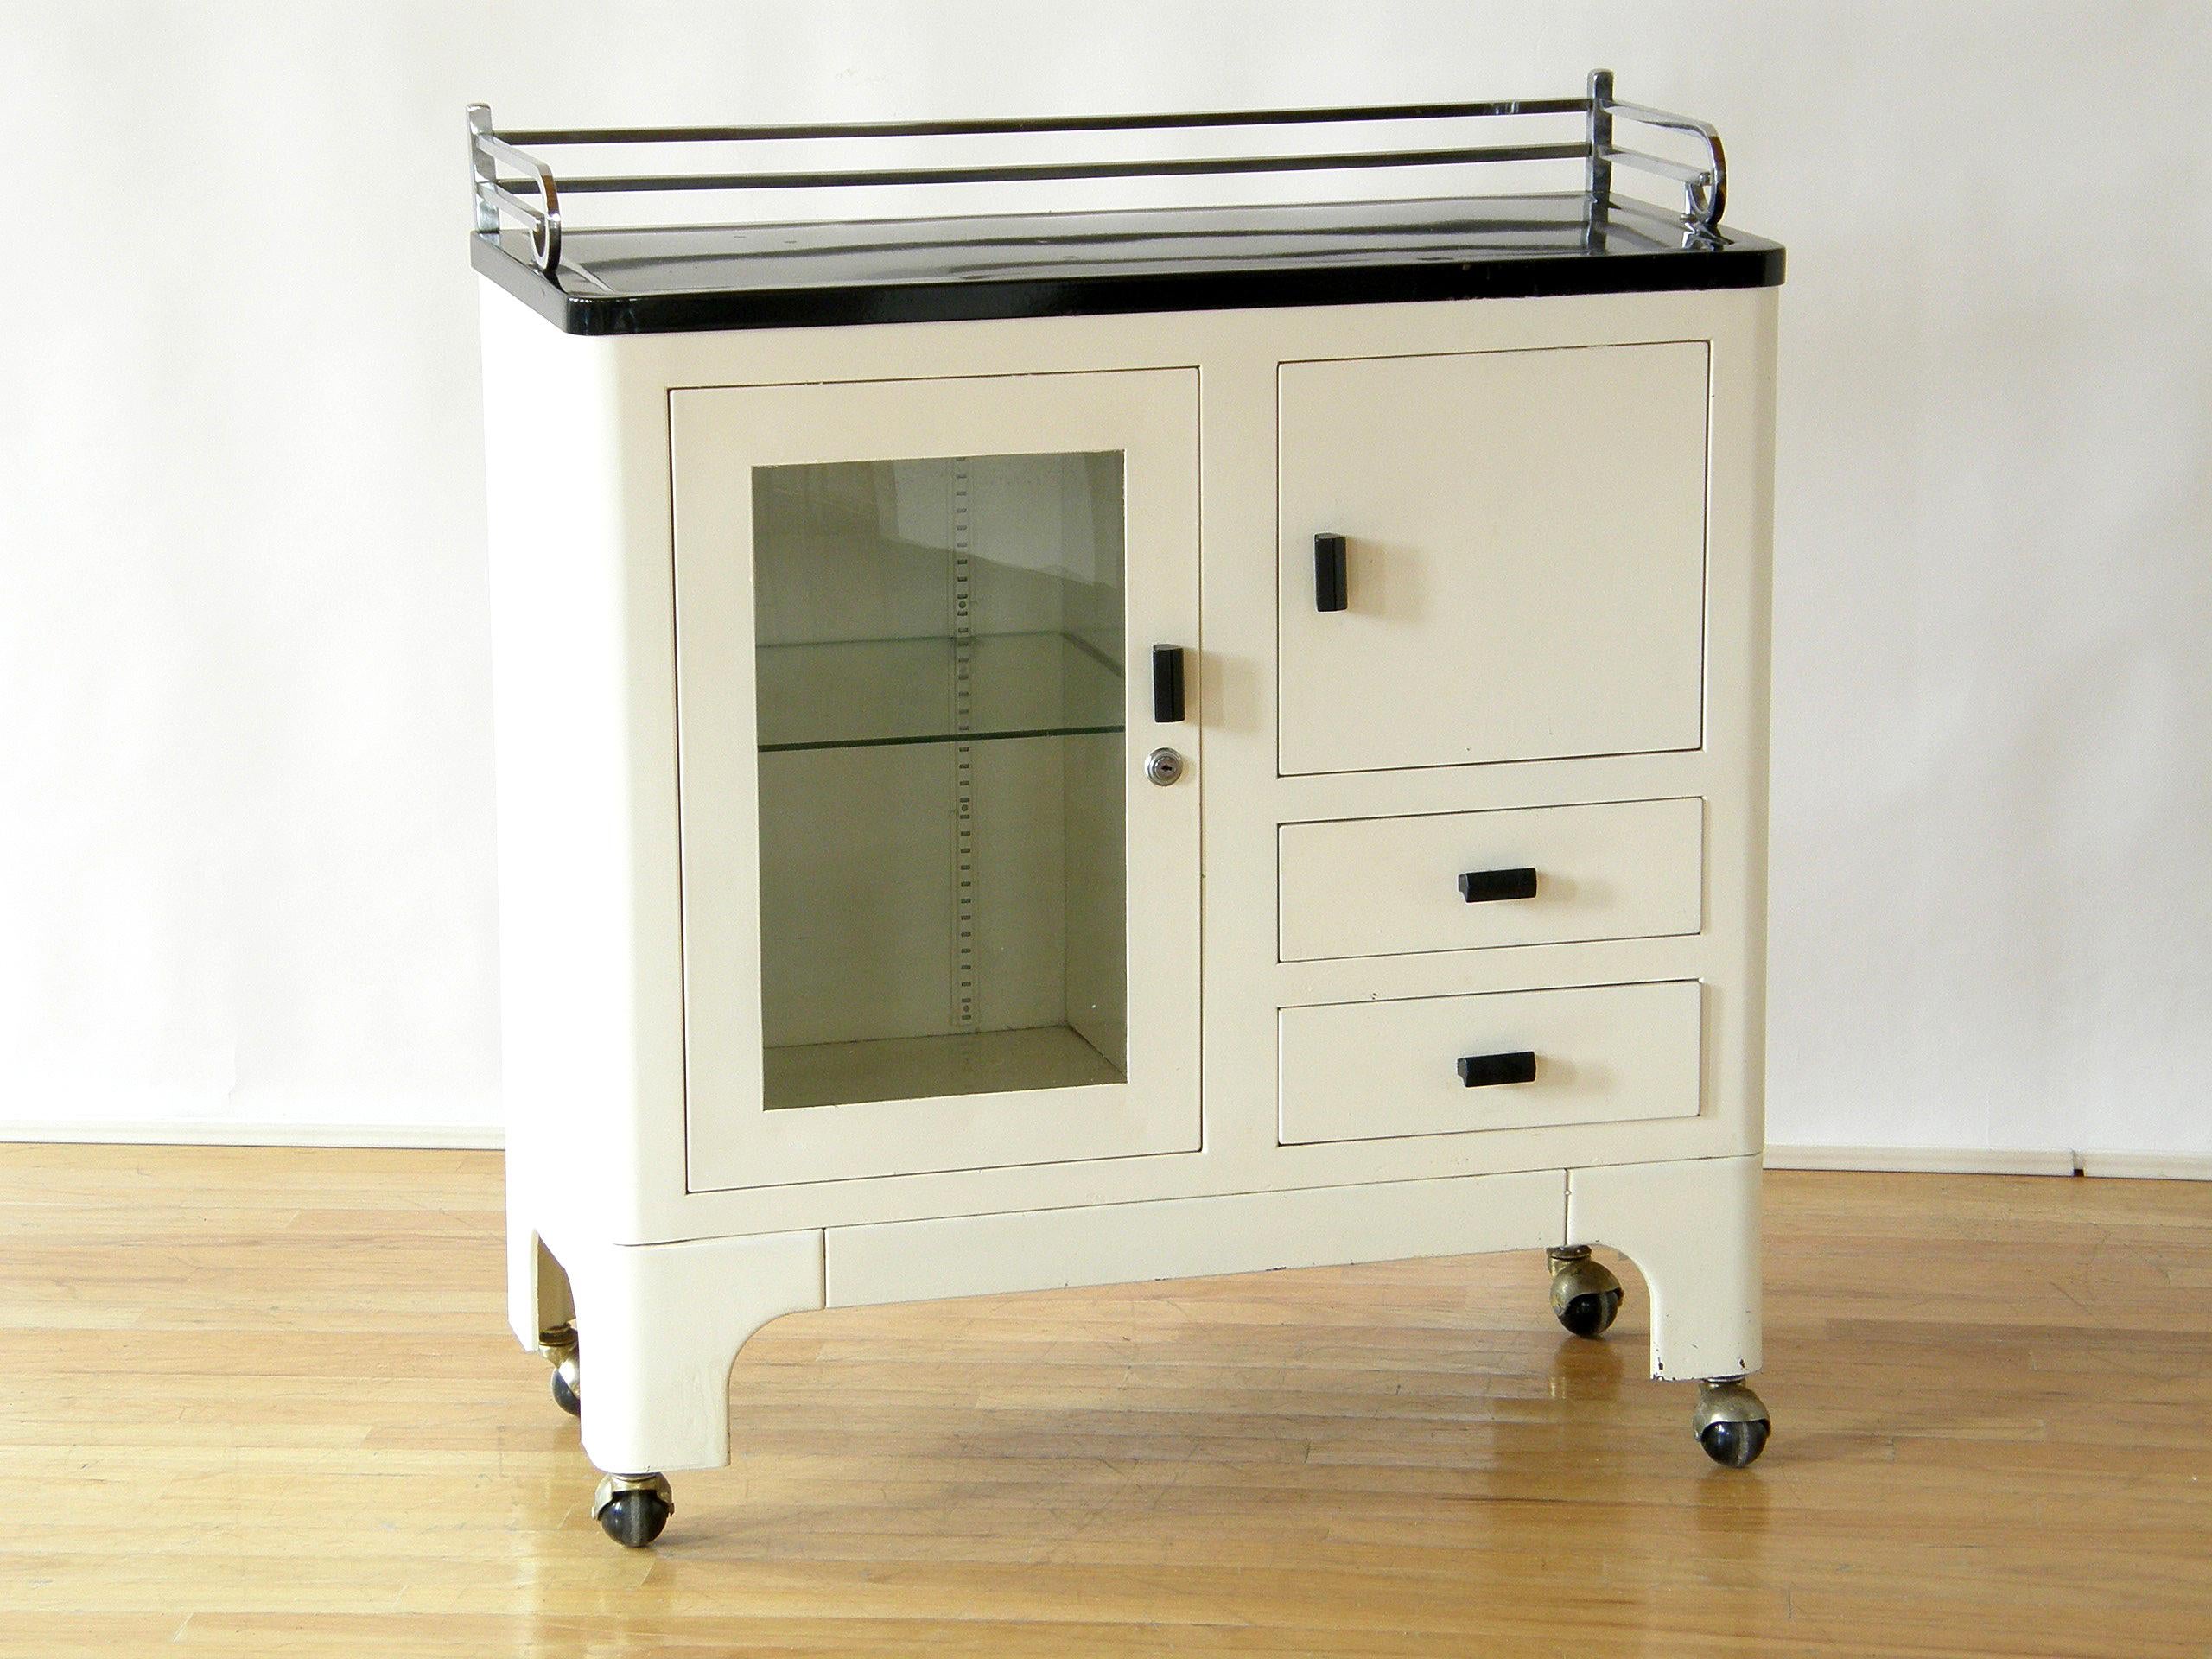 This circa 1930s medical cabinet has a machine age, modernist style with sleek rounded corners, a white enameled steel body, and a black enameled top with a streamlined, chrome-plated steel railing along the sides and back. The storage includes an